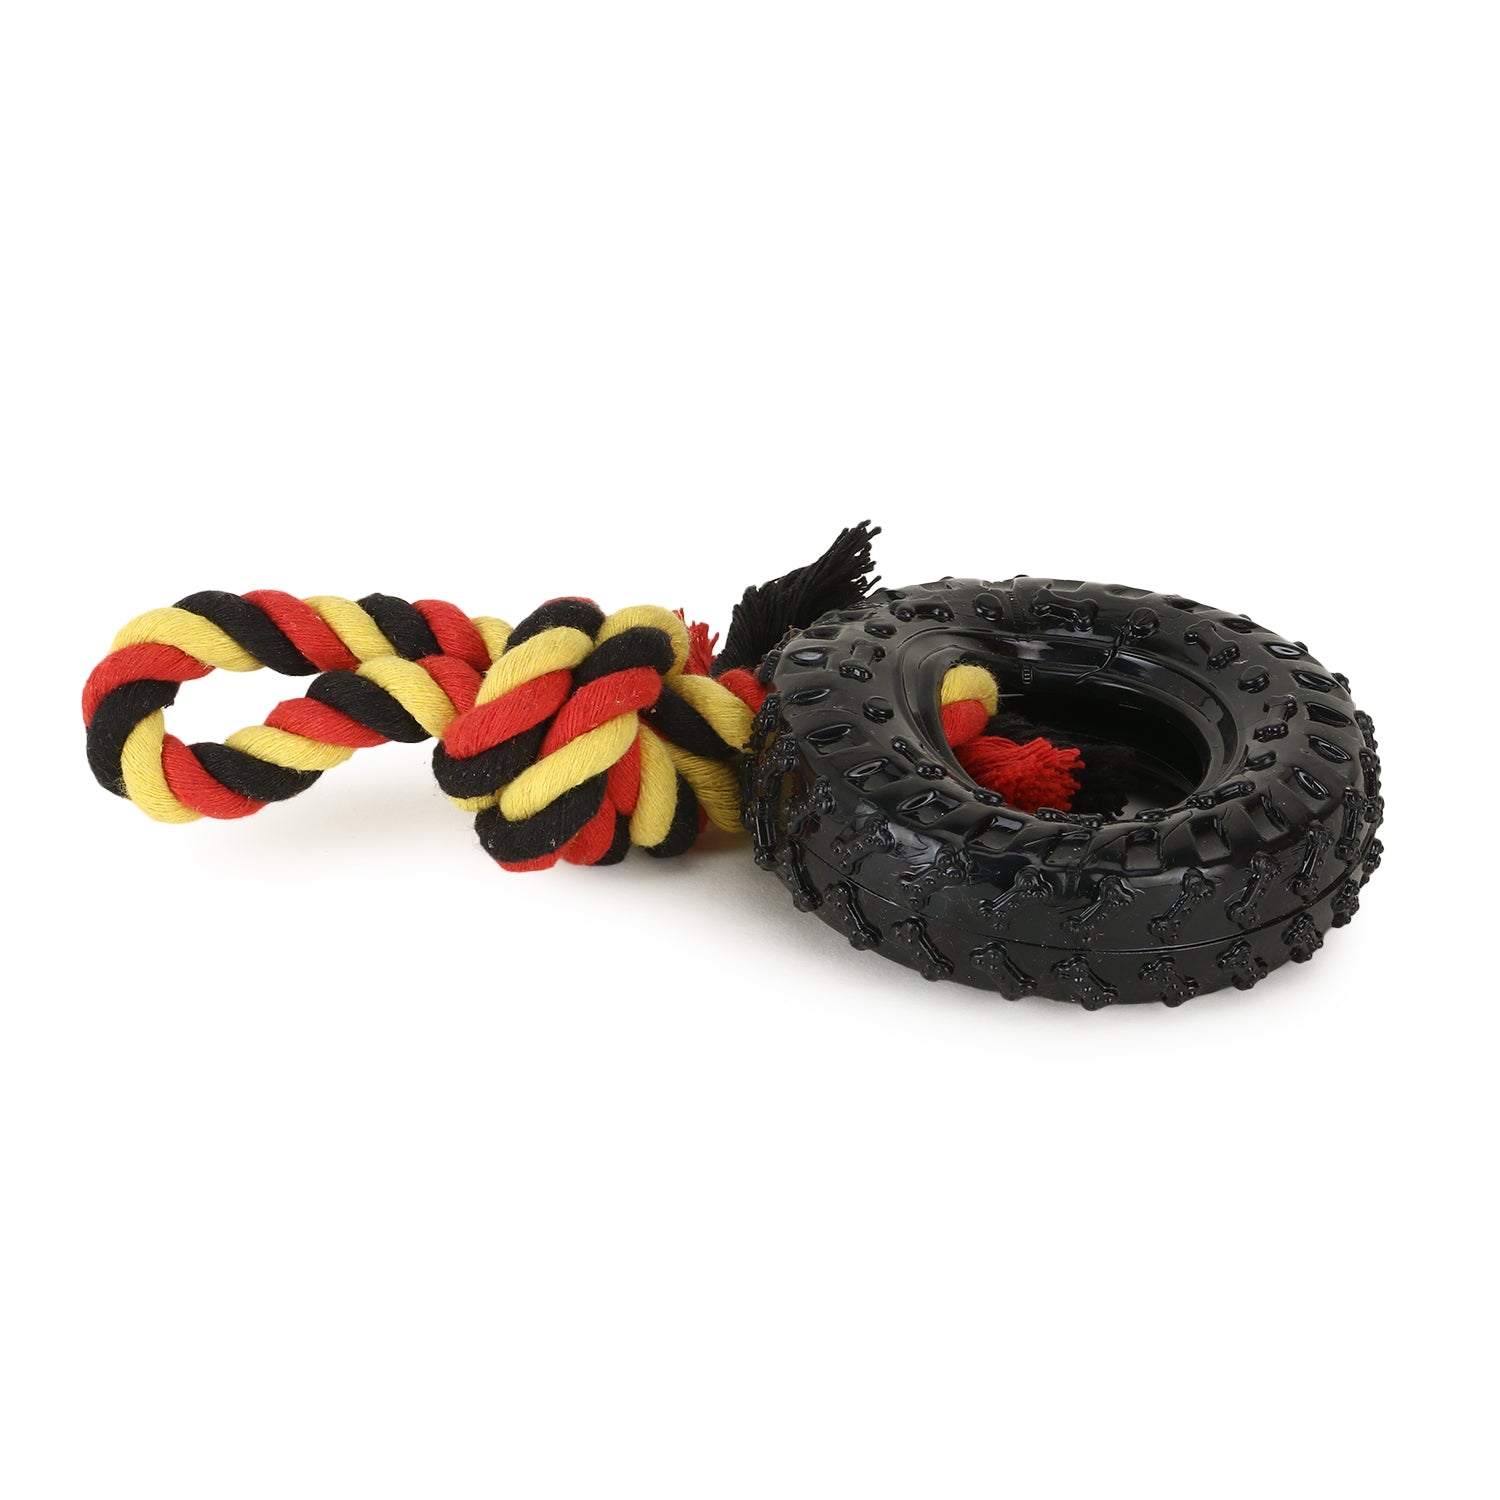 Basil Rubber Tyre with Rope for Tugging Hollow Centre for treat stuffing